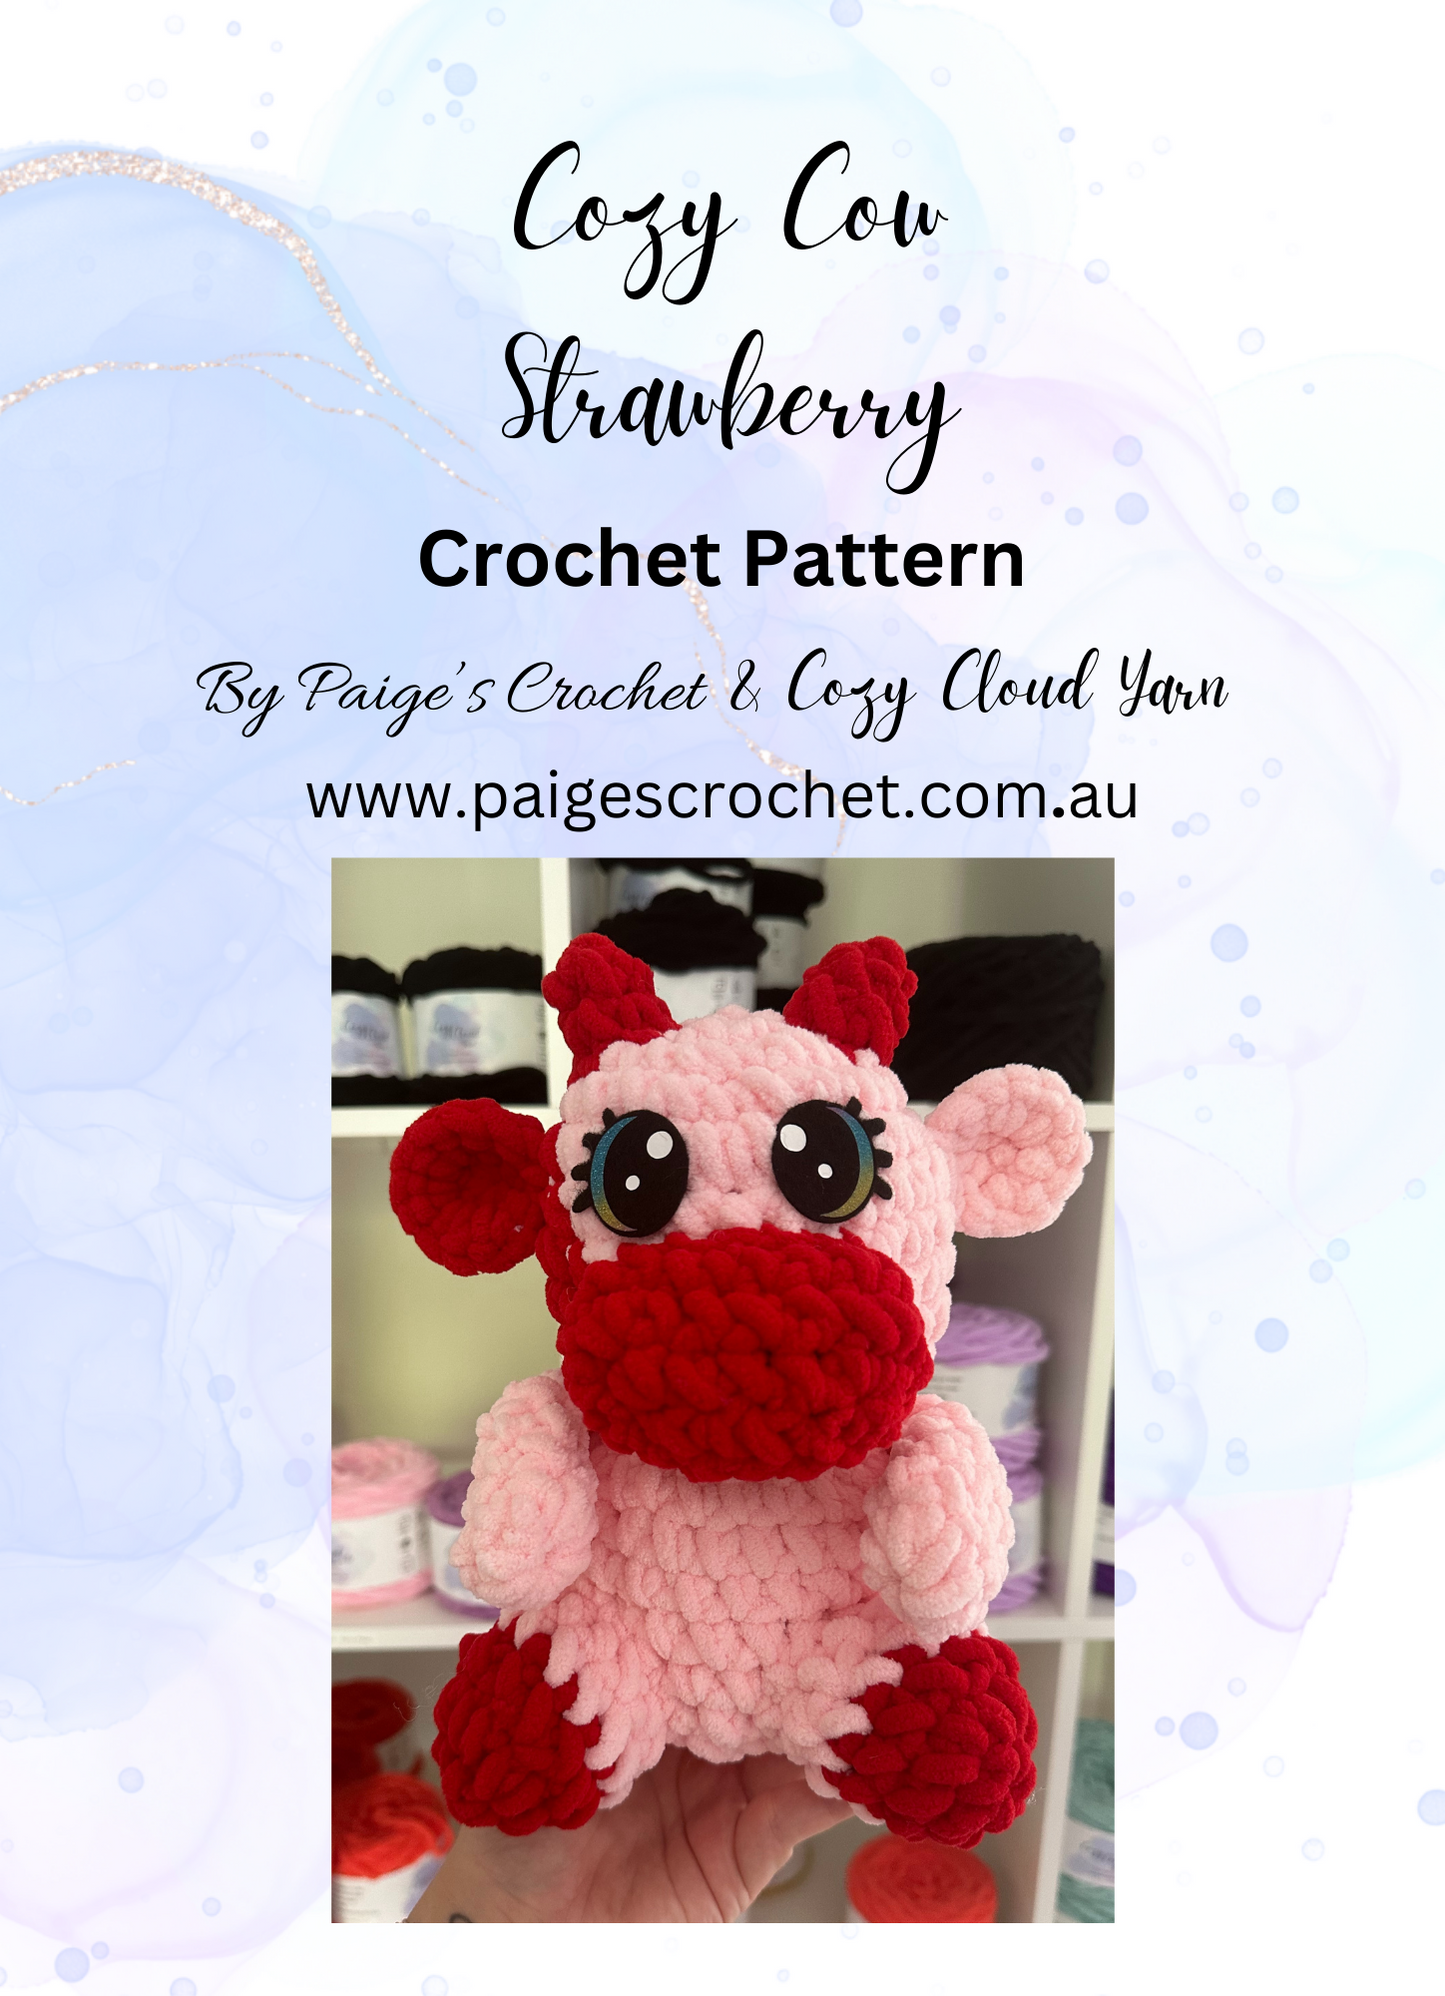 CROCHET PATTERN Cozy Cow- Strawberry - English - Not a physical item